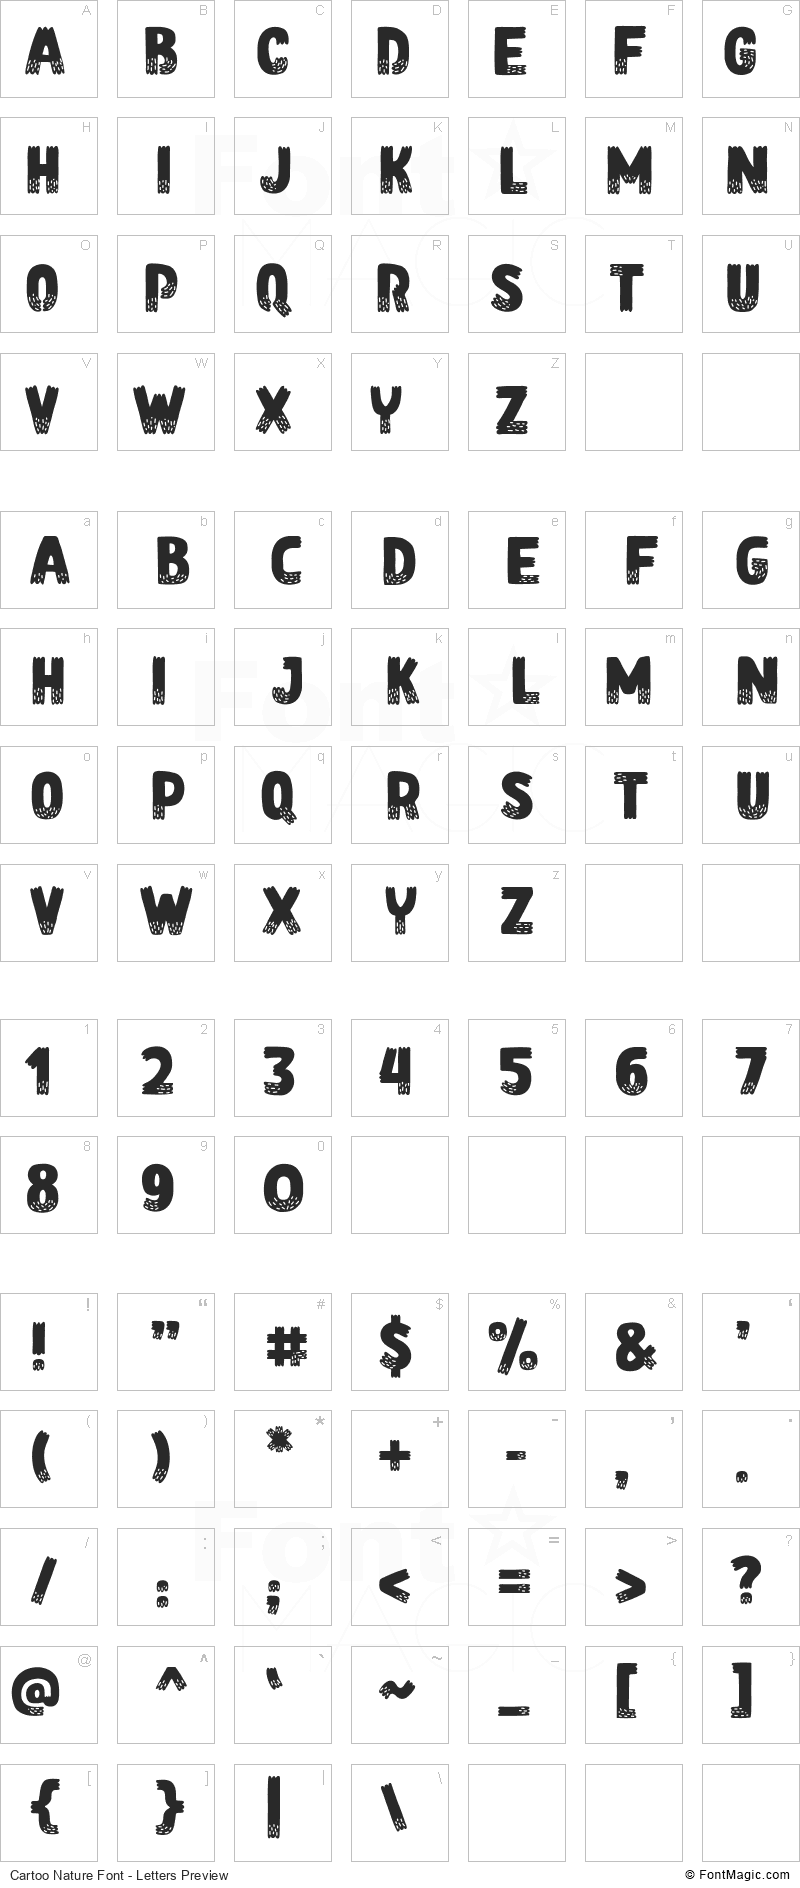 Cartoo Nature Font - All Latters Preview Chart